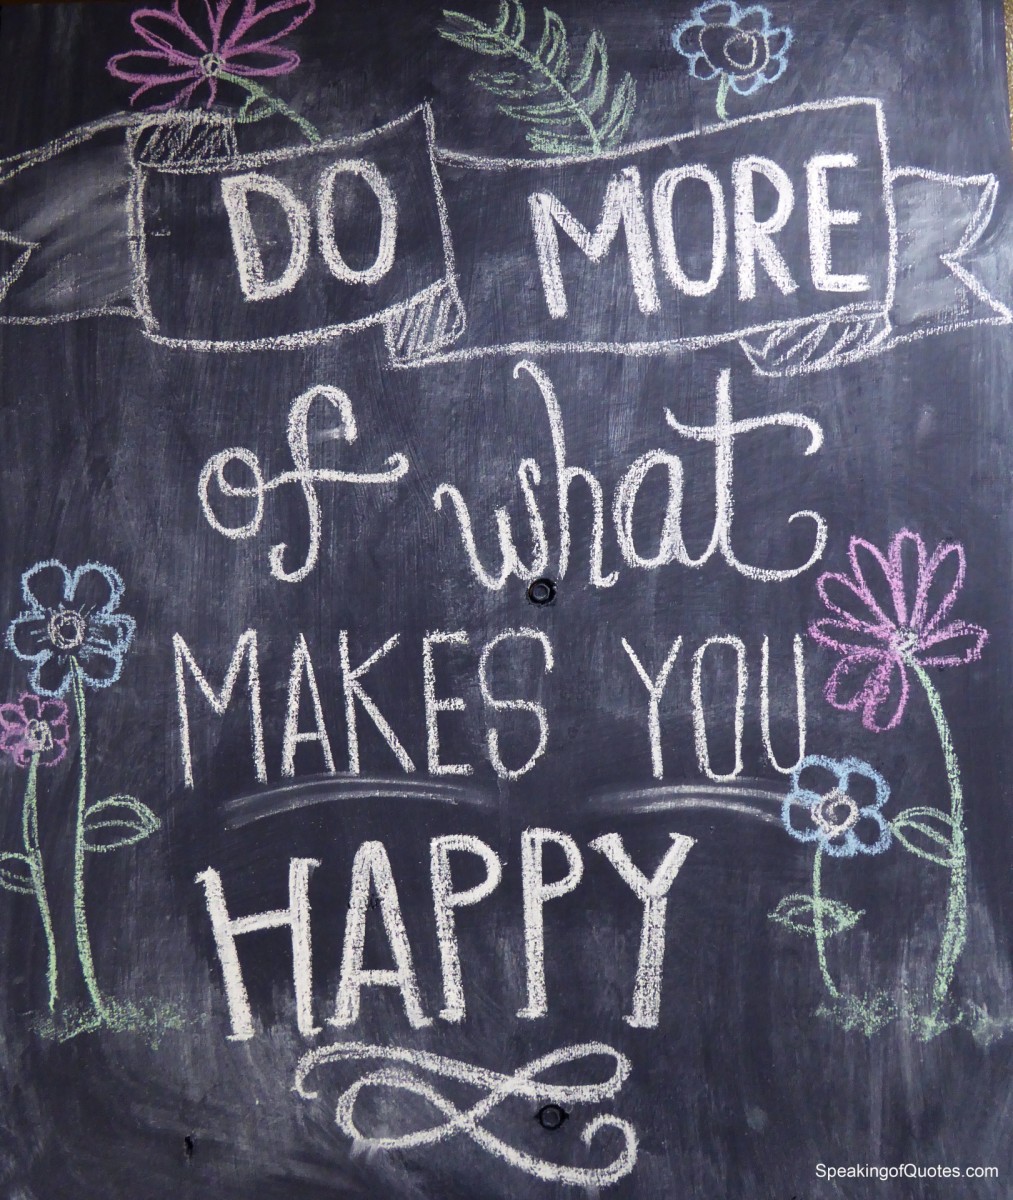 simple-ways-to-be-happier